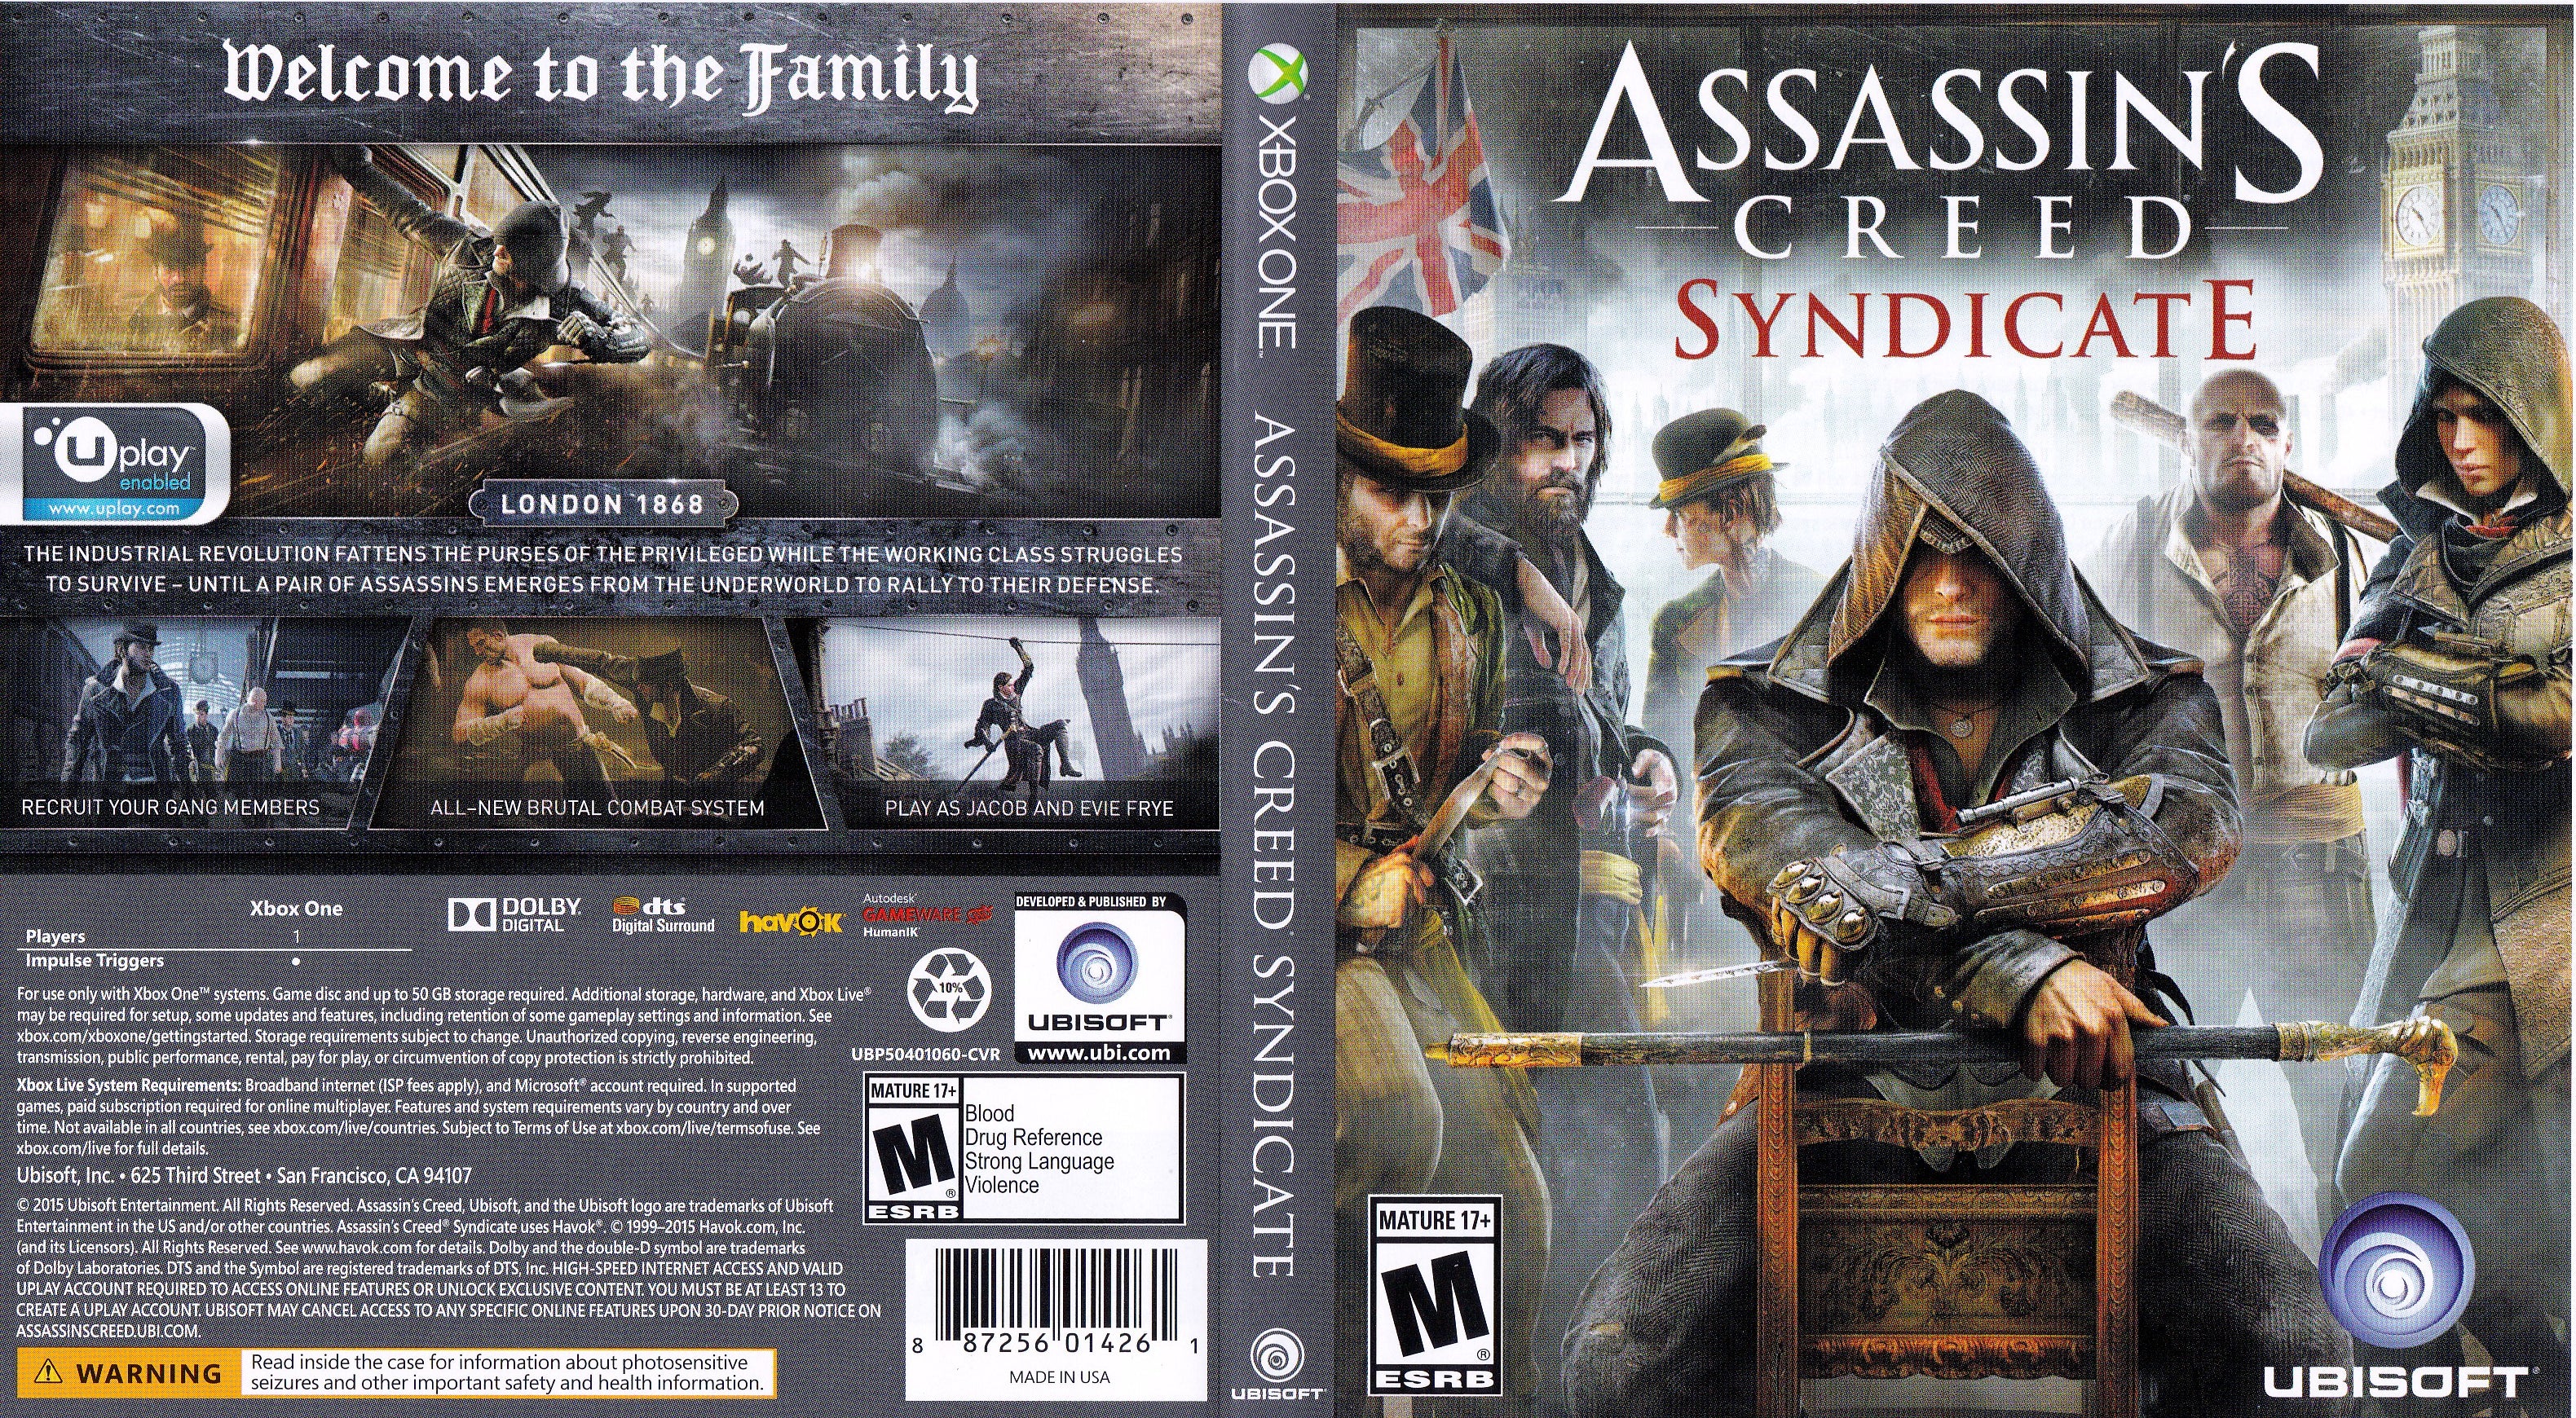 Assassin's Creed Syndicate Standard Edition Xbox One UBP50411060